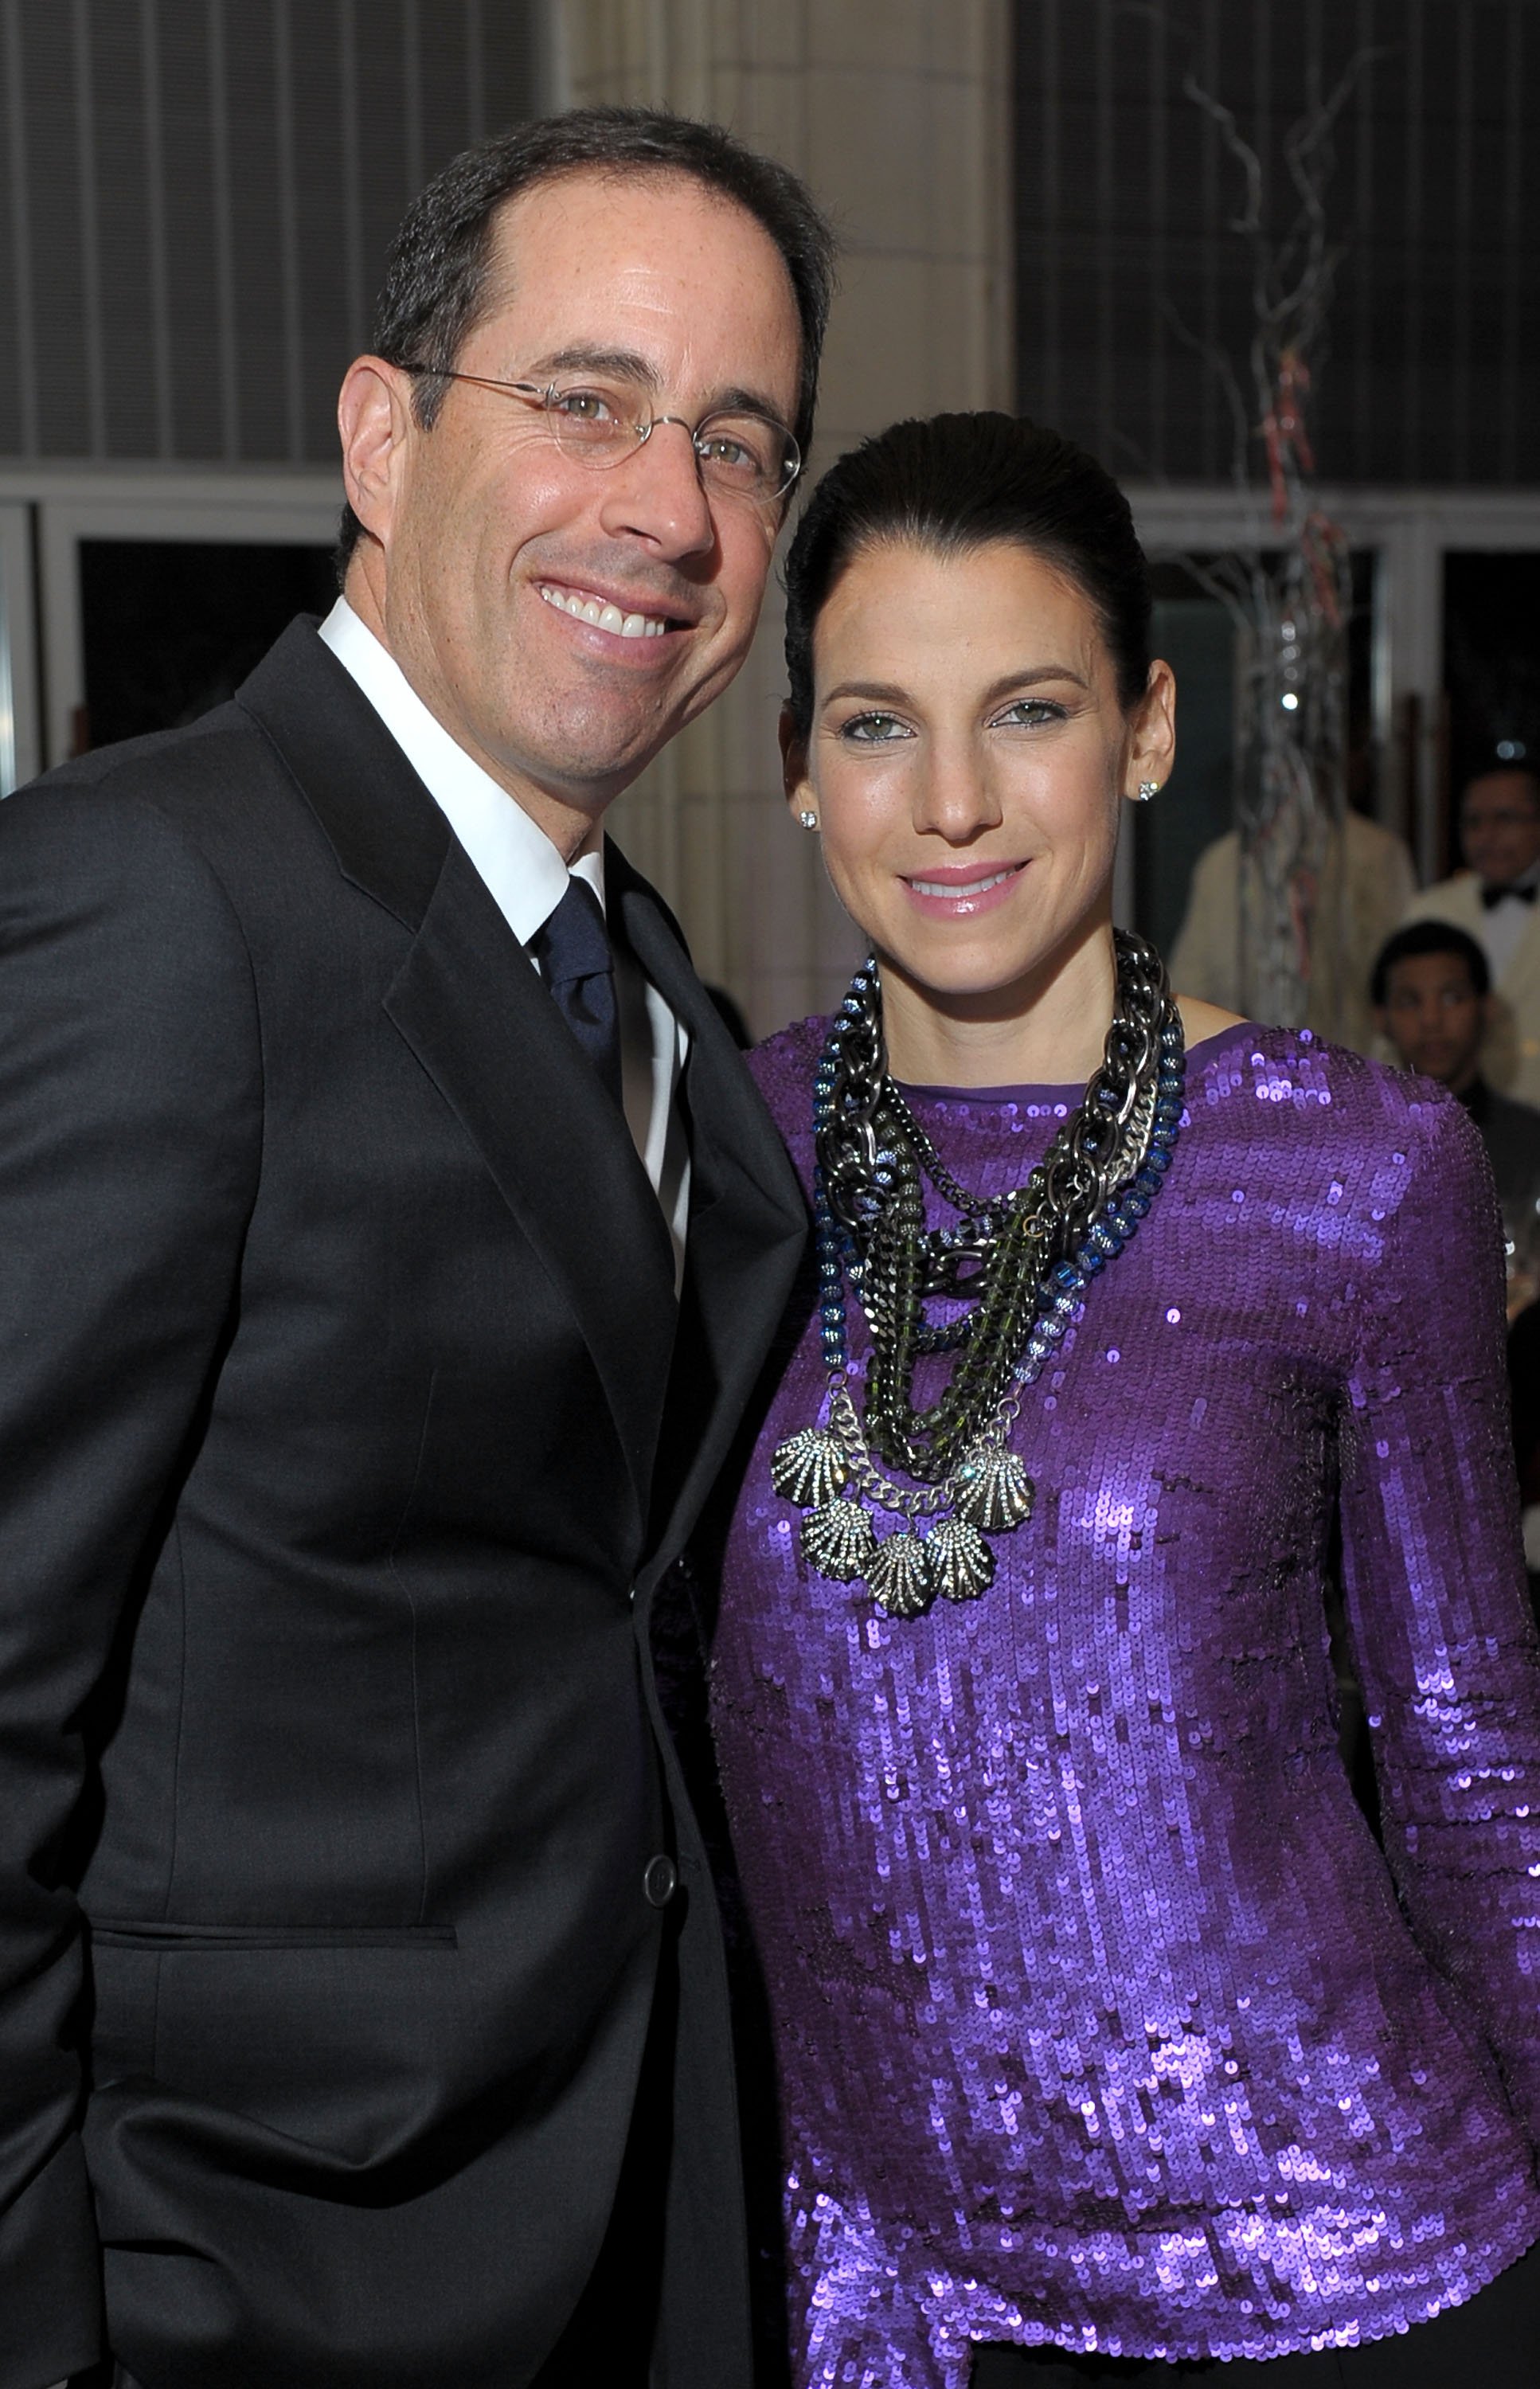 Jerry Seinfeld and Jessica Seinfeld at the 20th Anniversary Celebration of the Children's Defense Fund's Beat the Odds Program at Guastavino's on December 6, 2010 in New York City. | Source: Getty Images